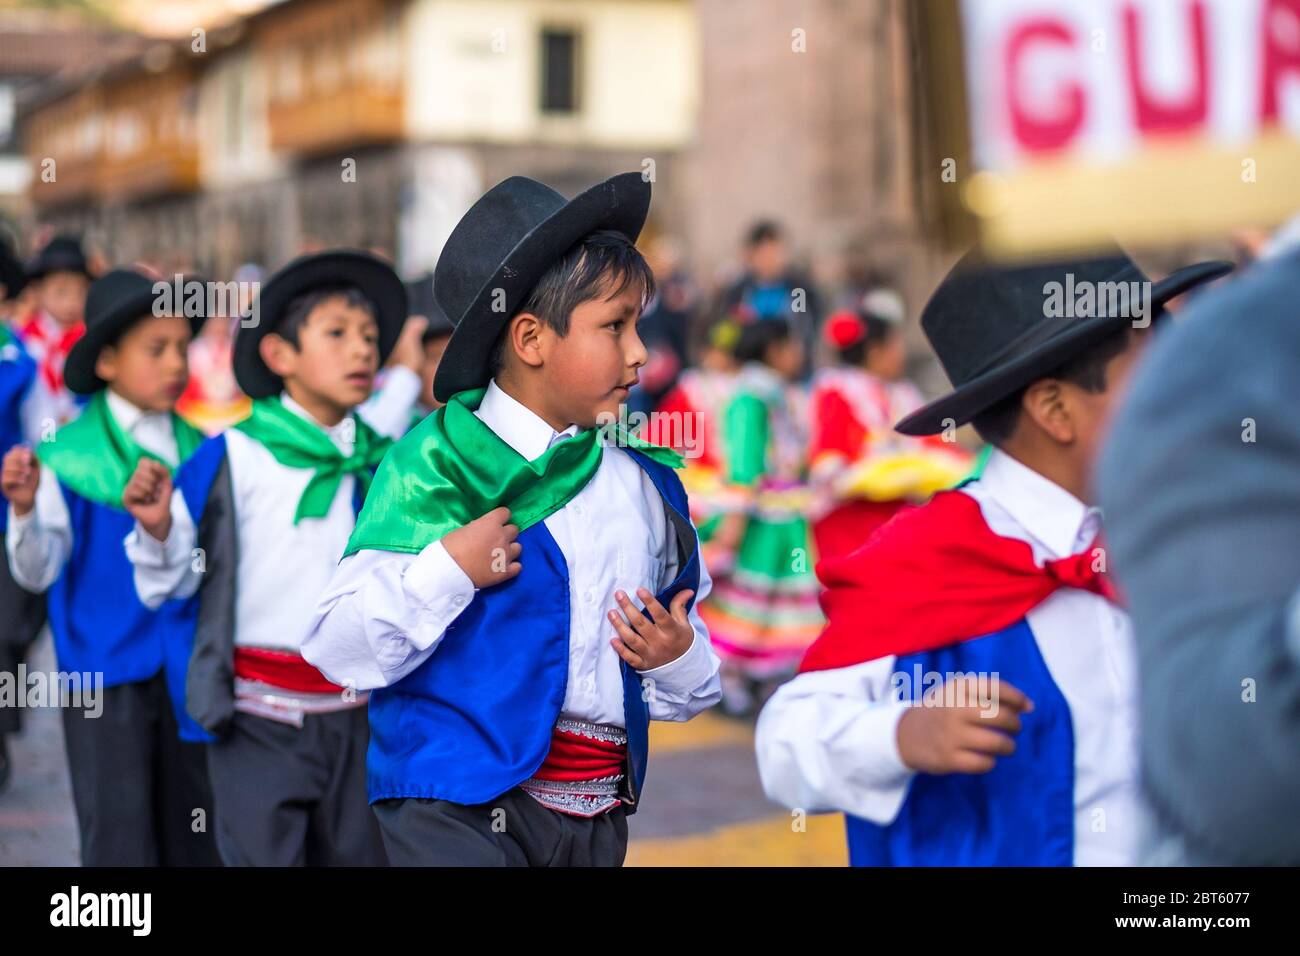 Cusco, Peru - October 11, 2018: Traditional holiday on a Cusco street in Peru Stock Photo